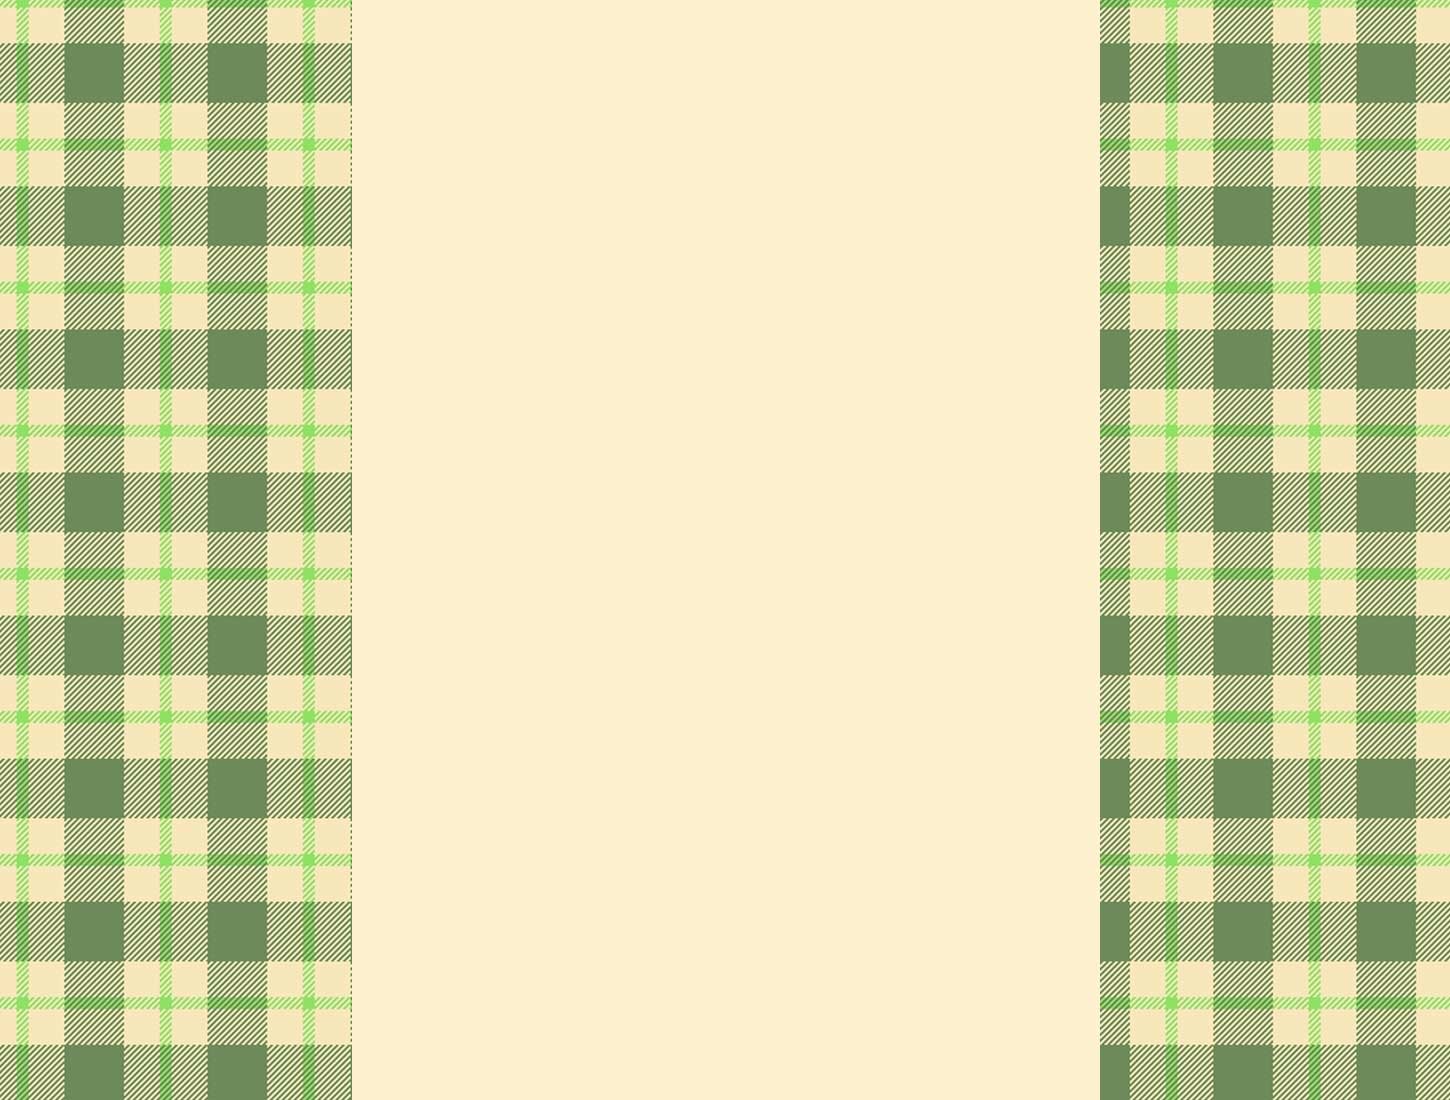 Free Green Plaidtartan Backgrounds For PowerPoint   Border and Frame